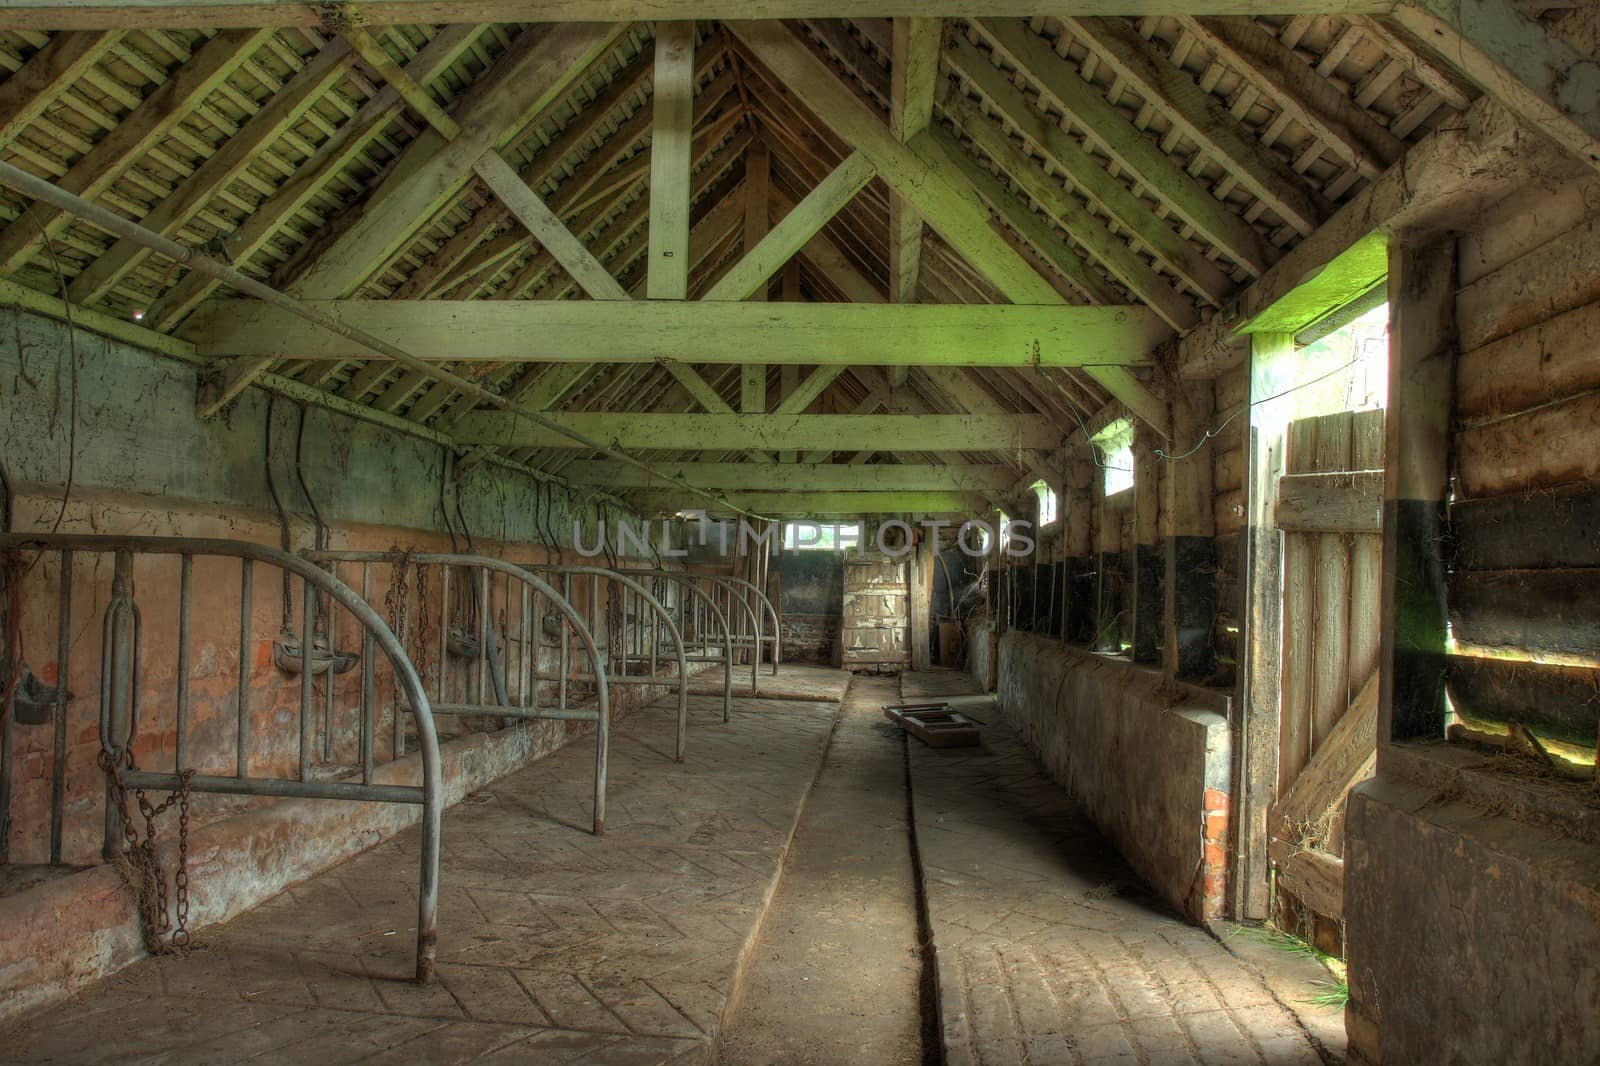 Interior view of old cowshed, Worcestershire, England.